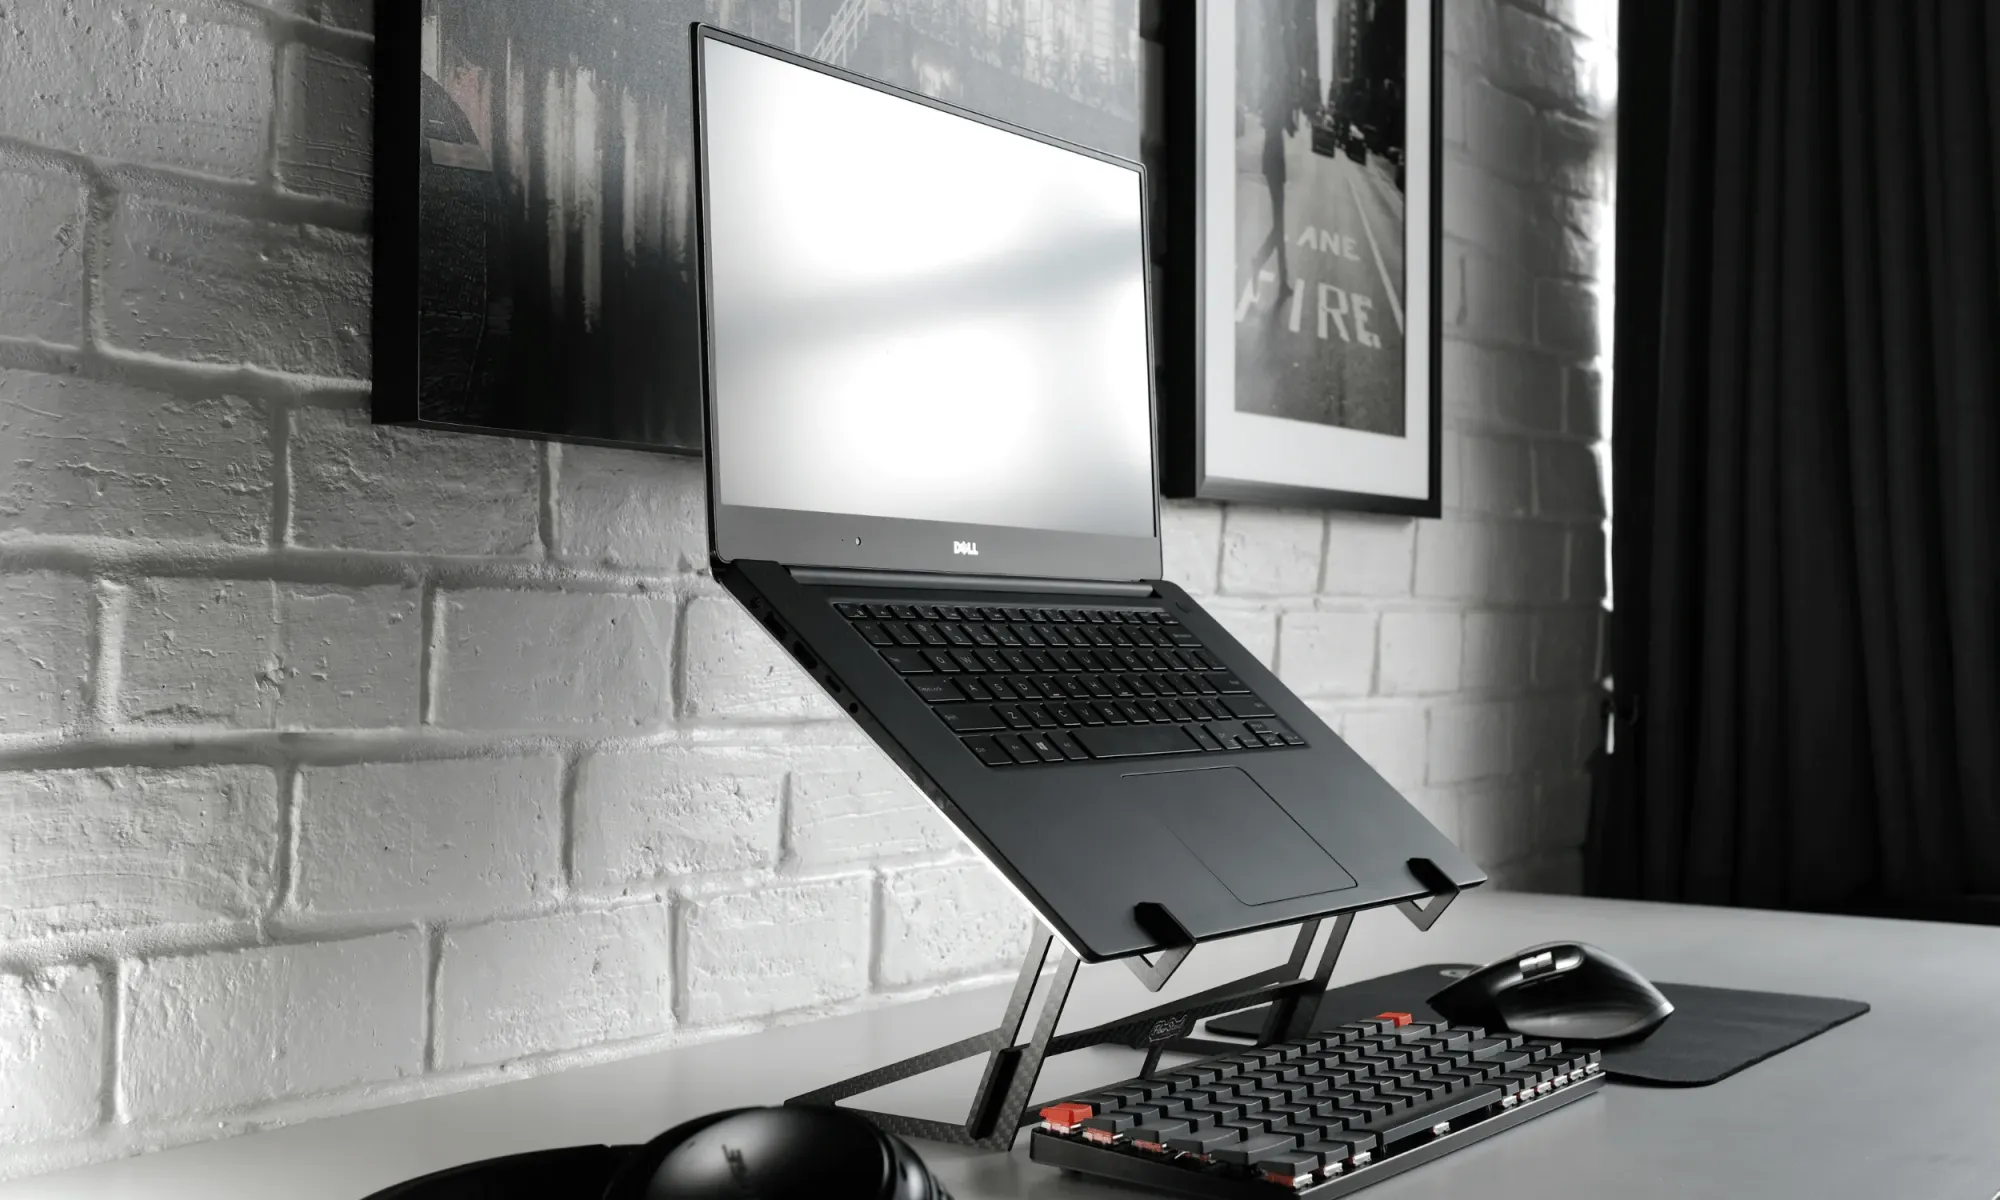 Portable and travel-friendly laptop stand on a grey desk